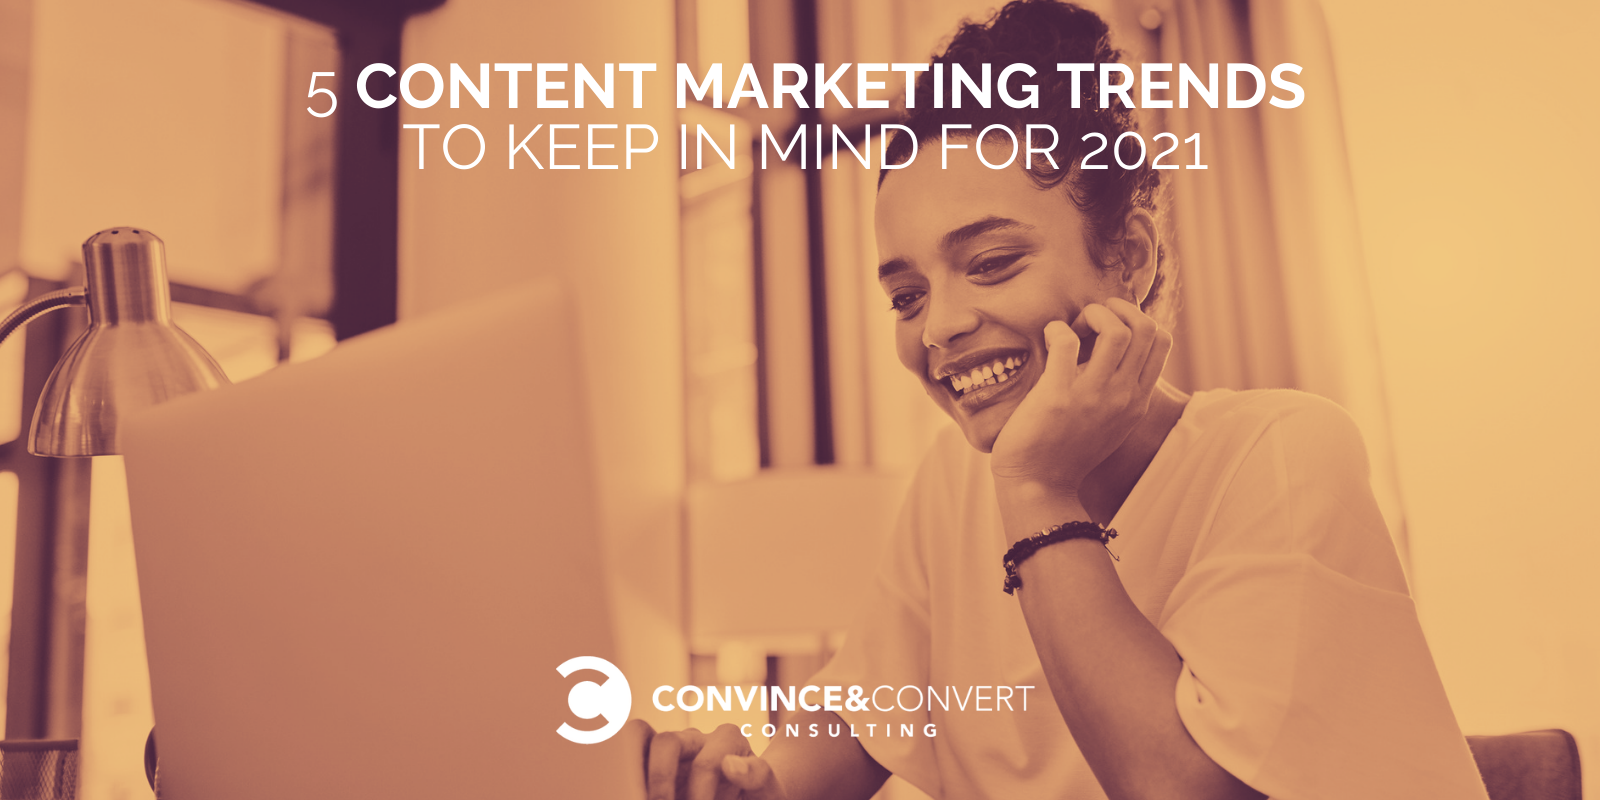 You are currently viewing 5 Content Marketing Trends to Keep in Mind for 2021